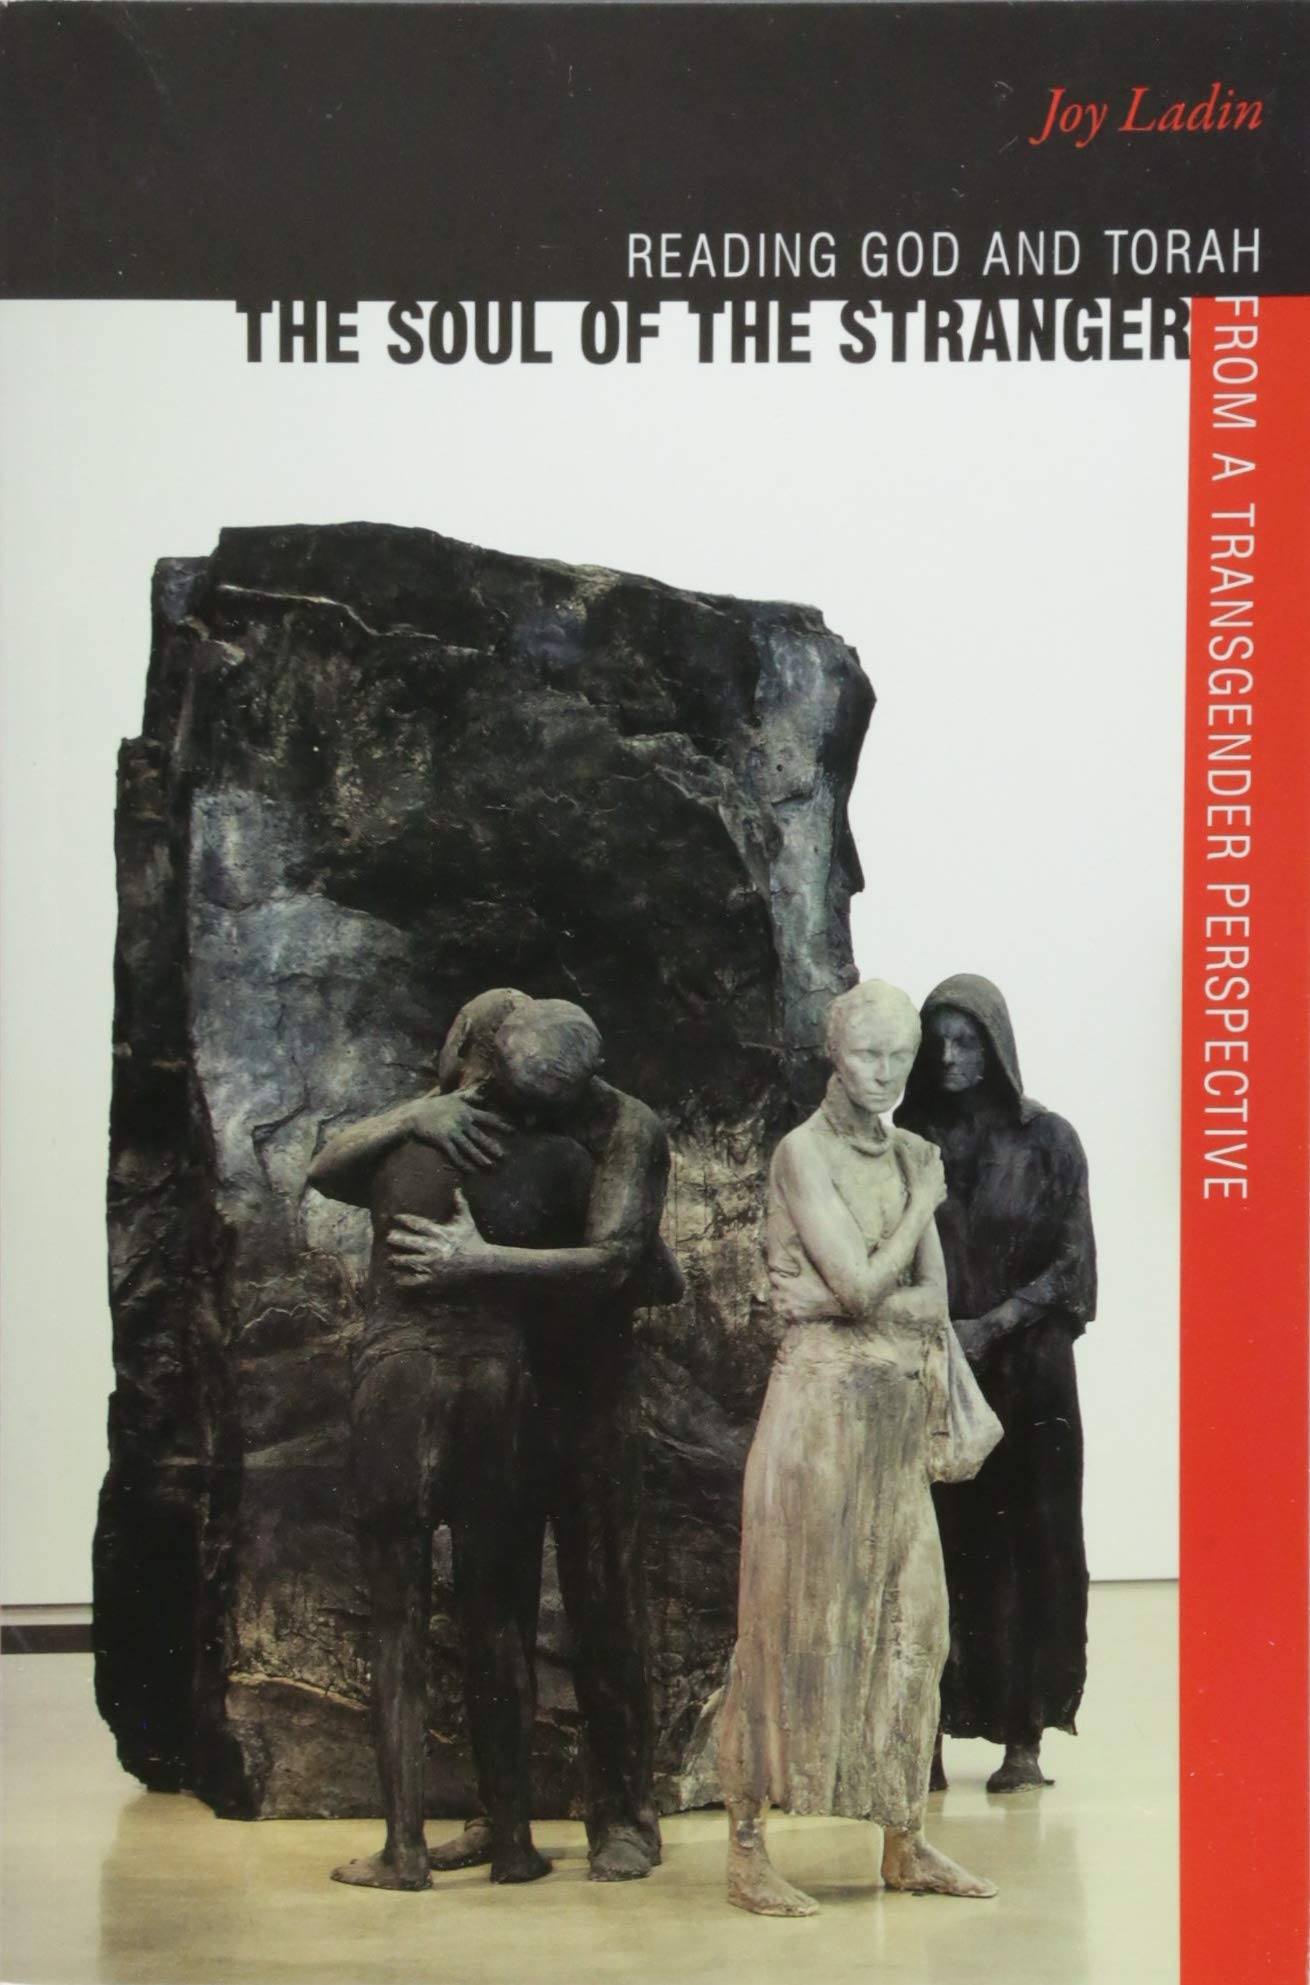 The Soul of the Stranger: Reading God and Torah from a Transgender Perspective by Joy Ladin